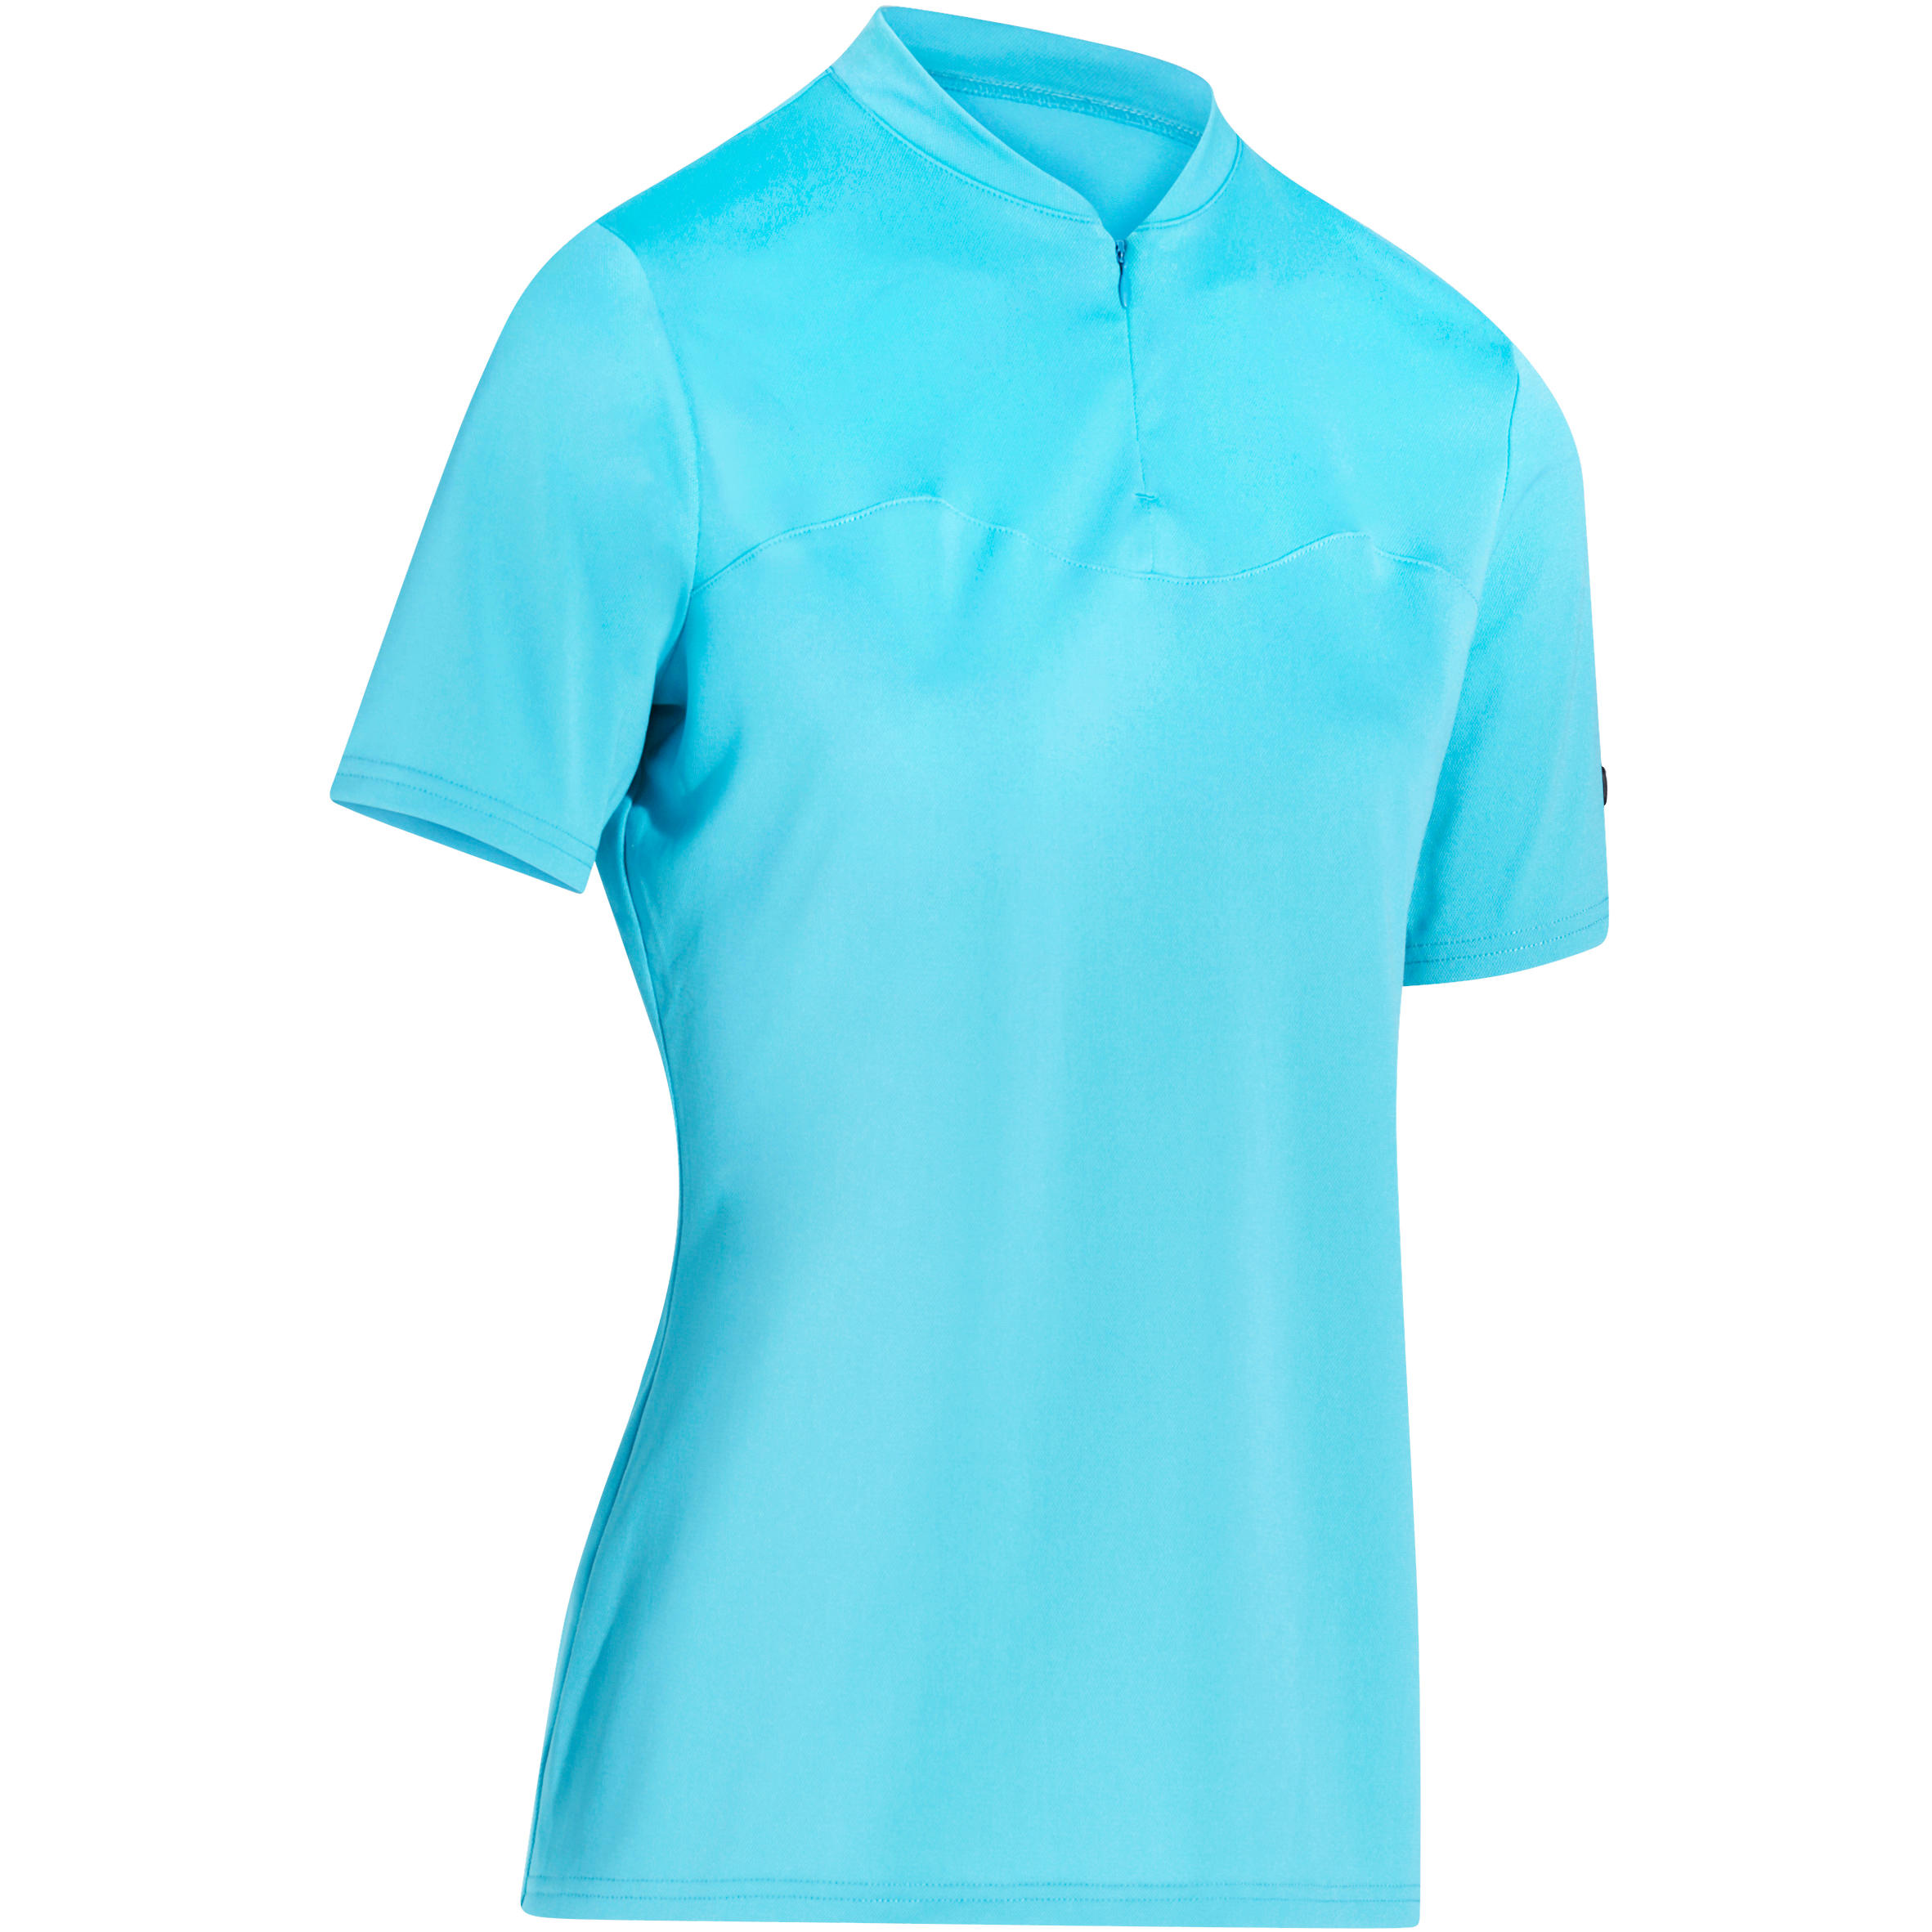 TRIBAN 300 Women's Short-Sleeved Cycling Jersey - Blue